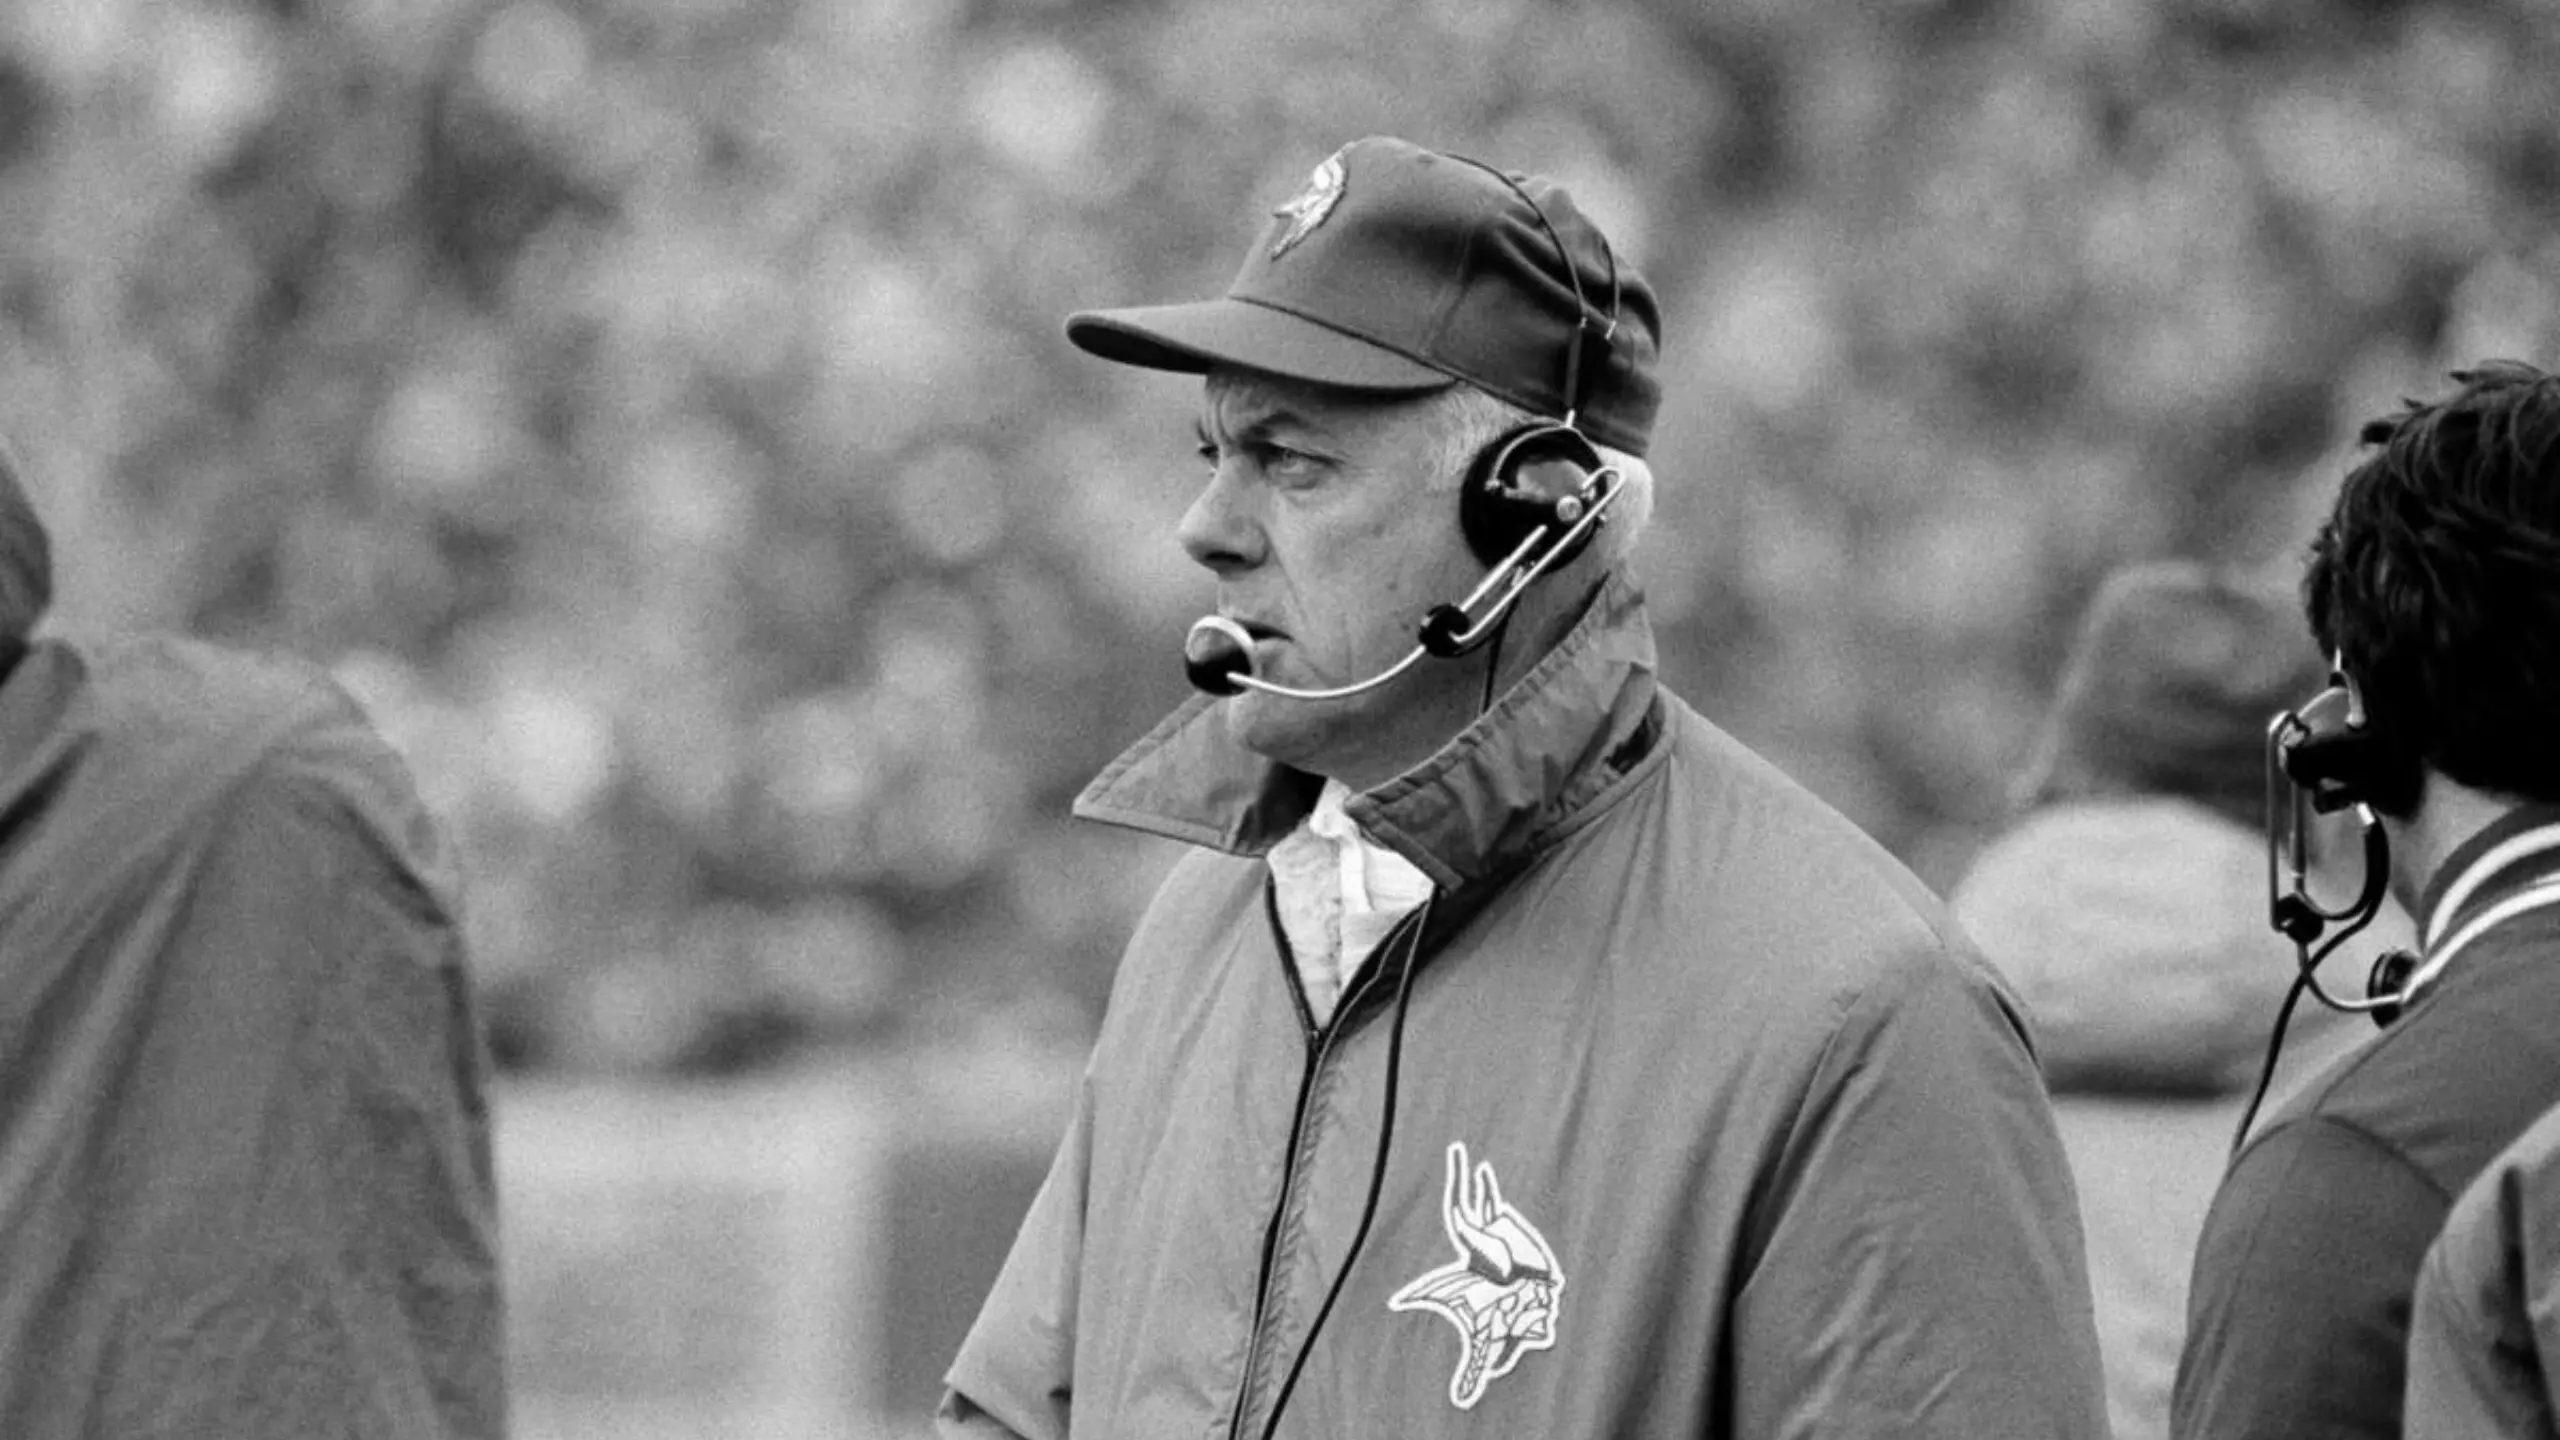 Bud Grant funeral: Loved ones remember his life and legacy